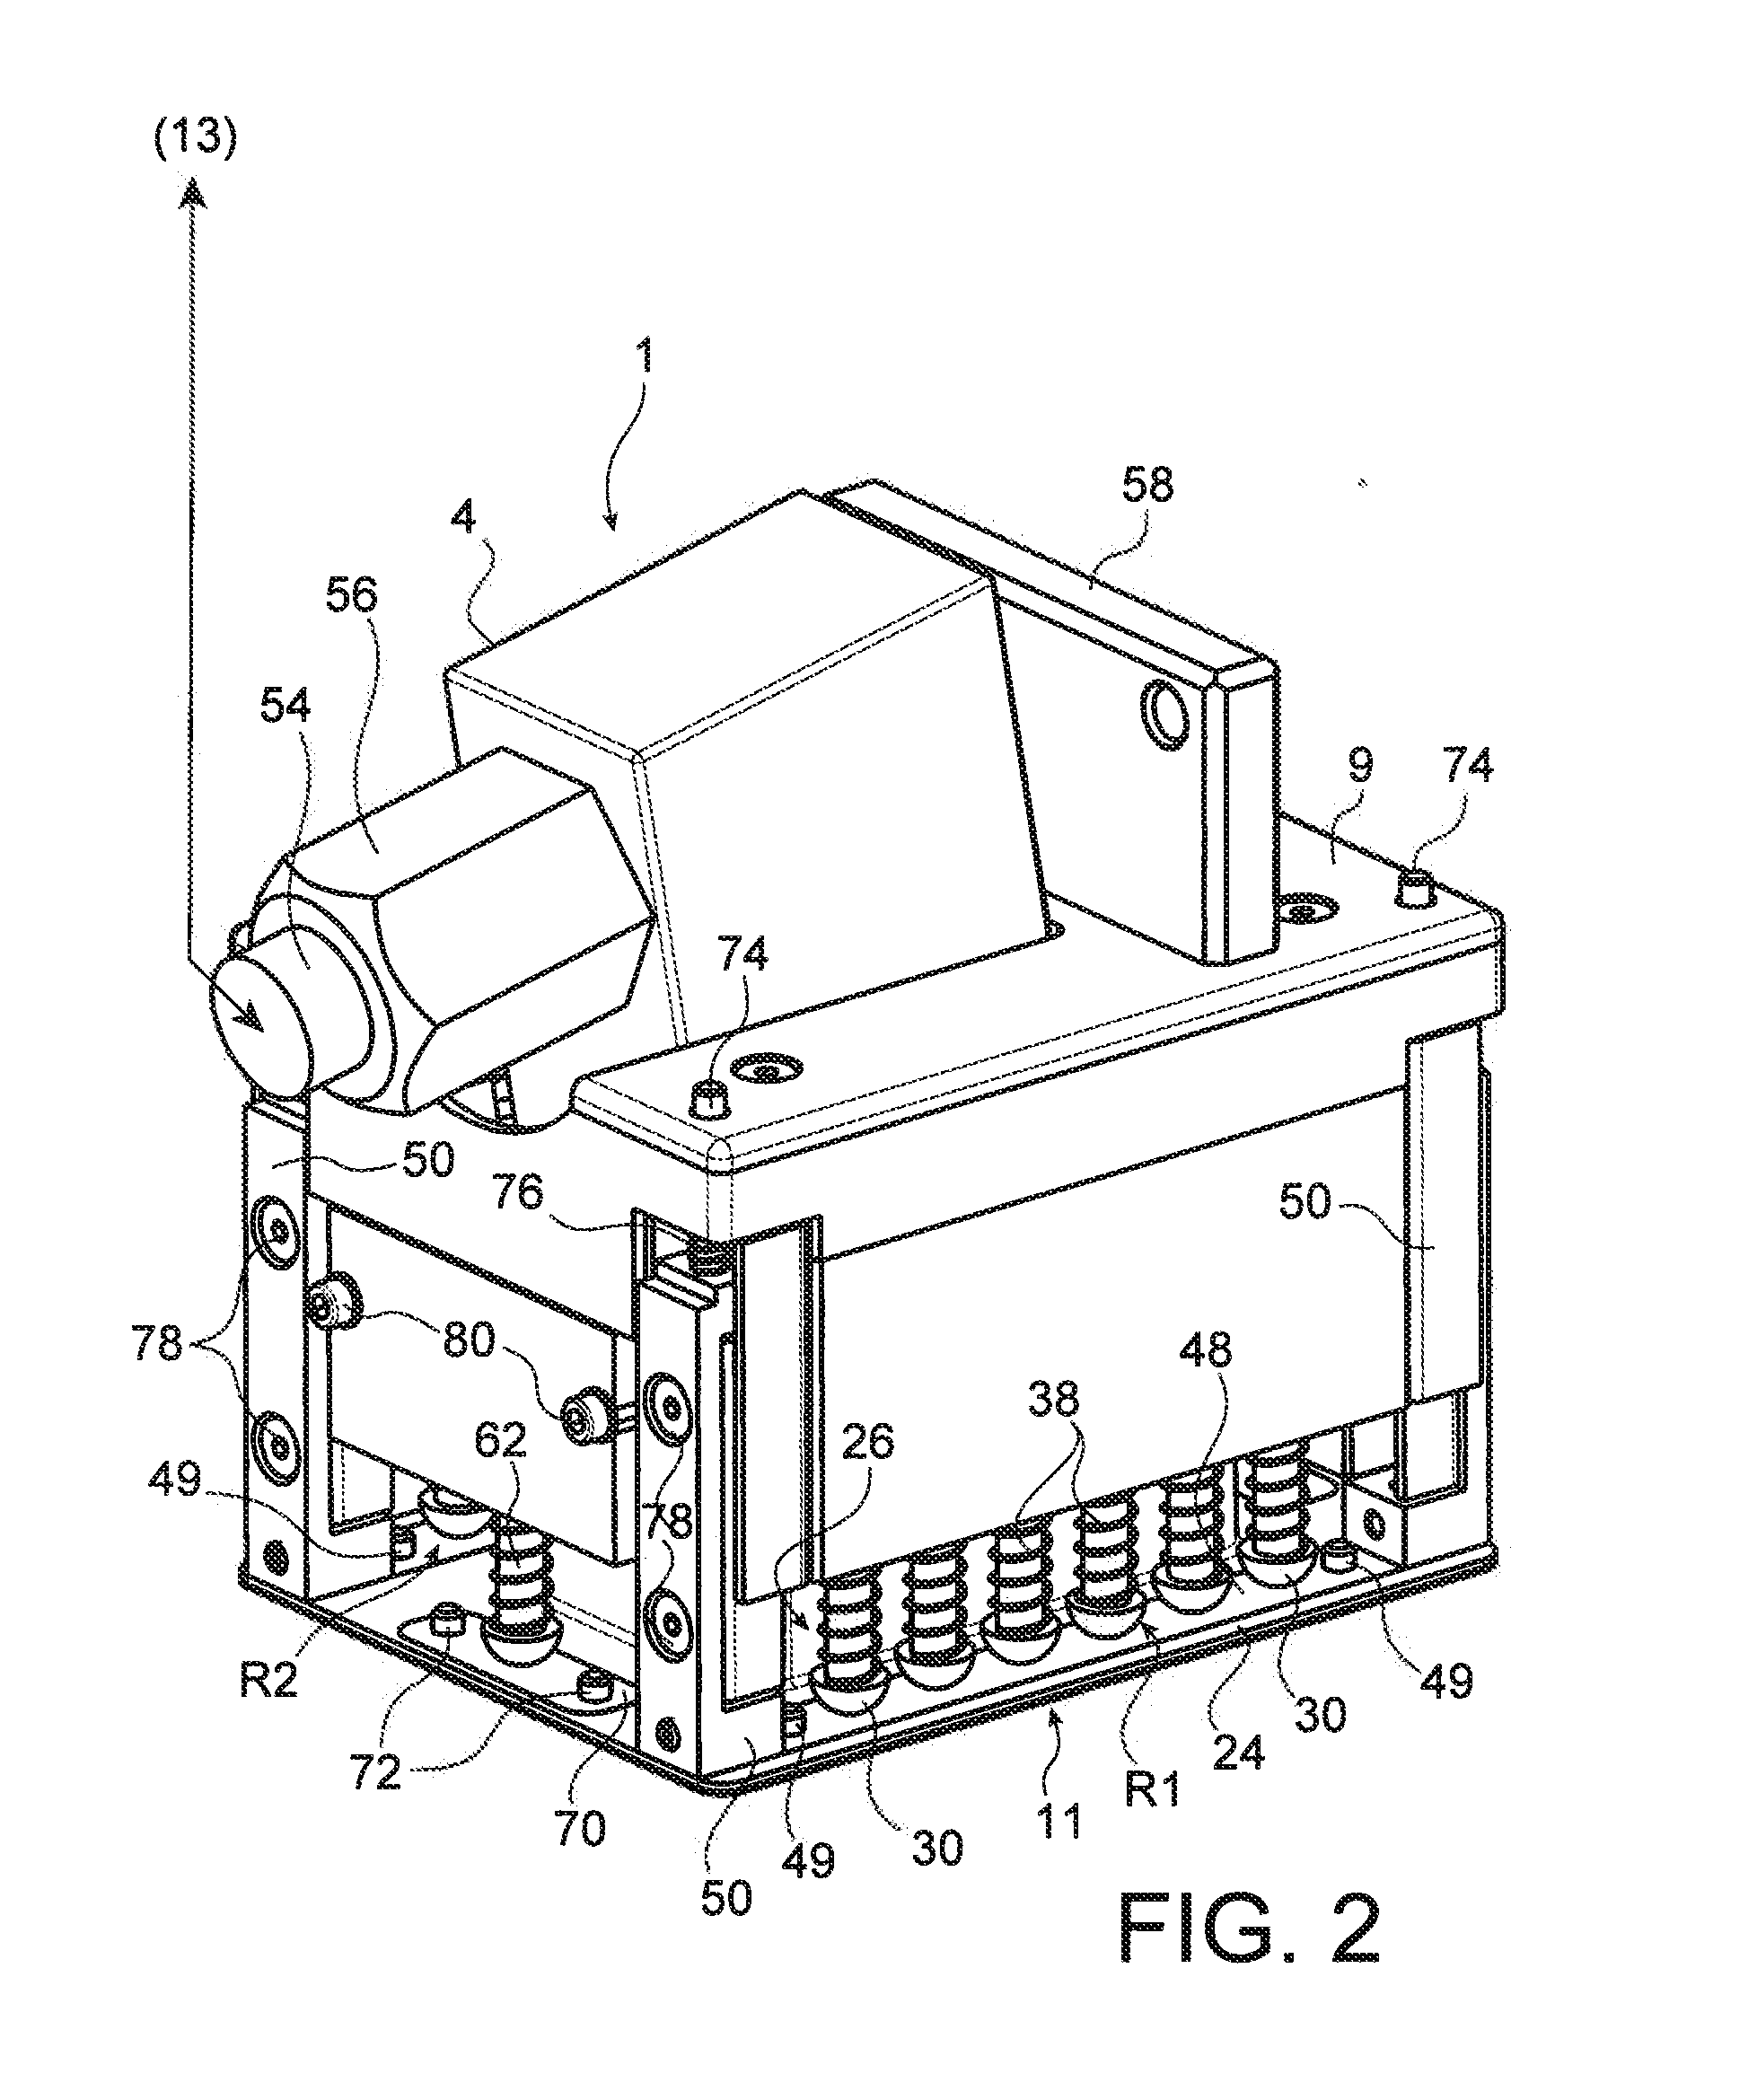 Phased array ultrasonic contact transducer, with a flexible wedge and a profilometer